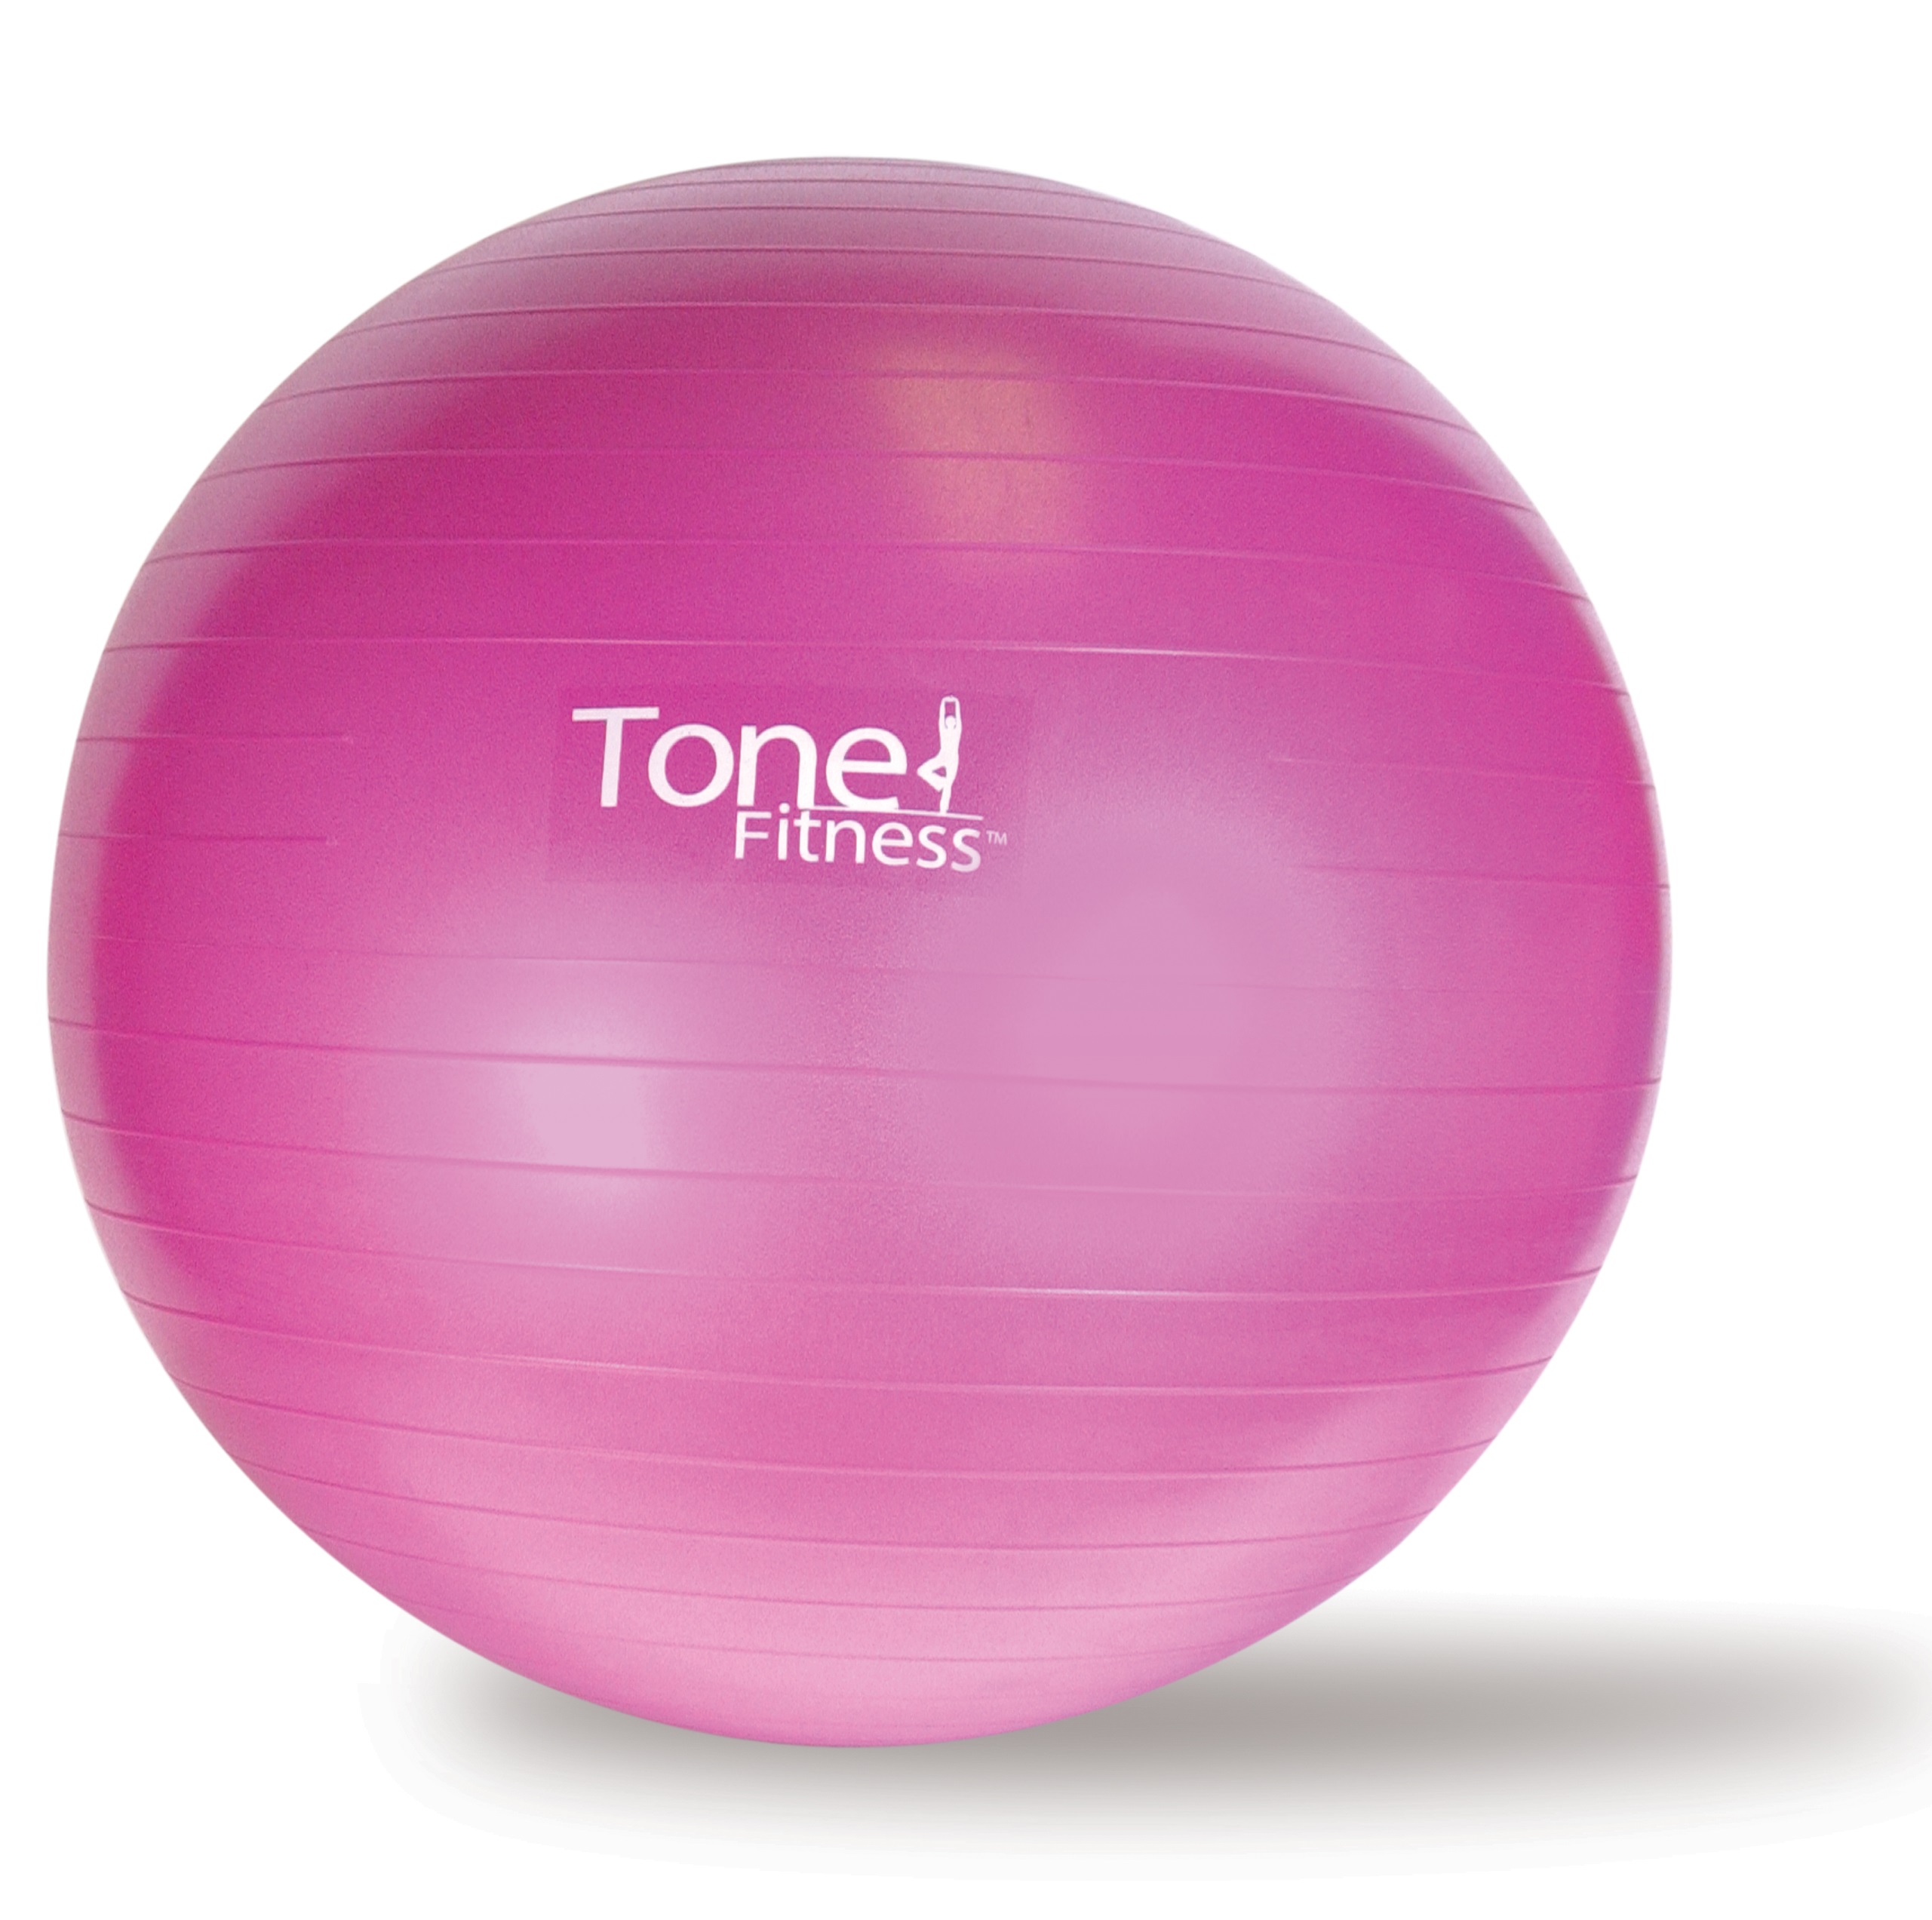 Tone Fitness Anti-burst Stability Ball 55 cm, Pink - image 1 of 3